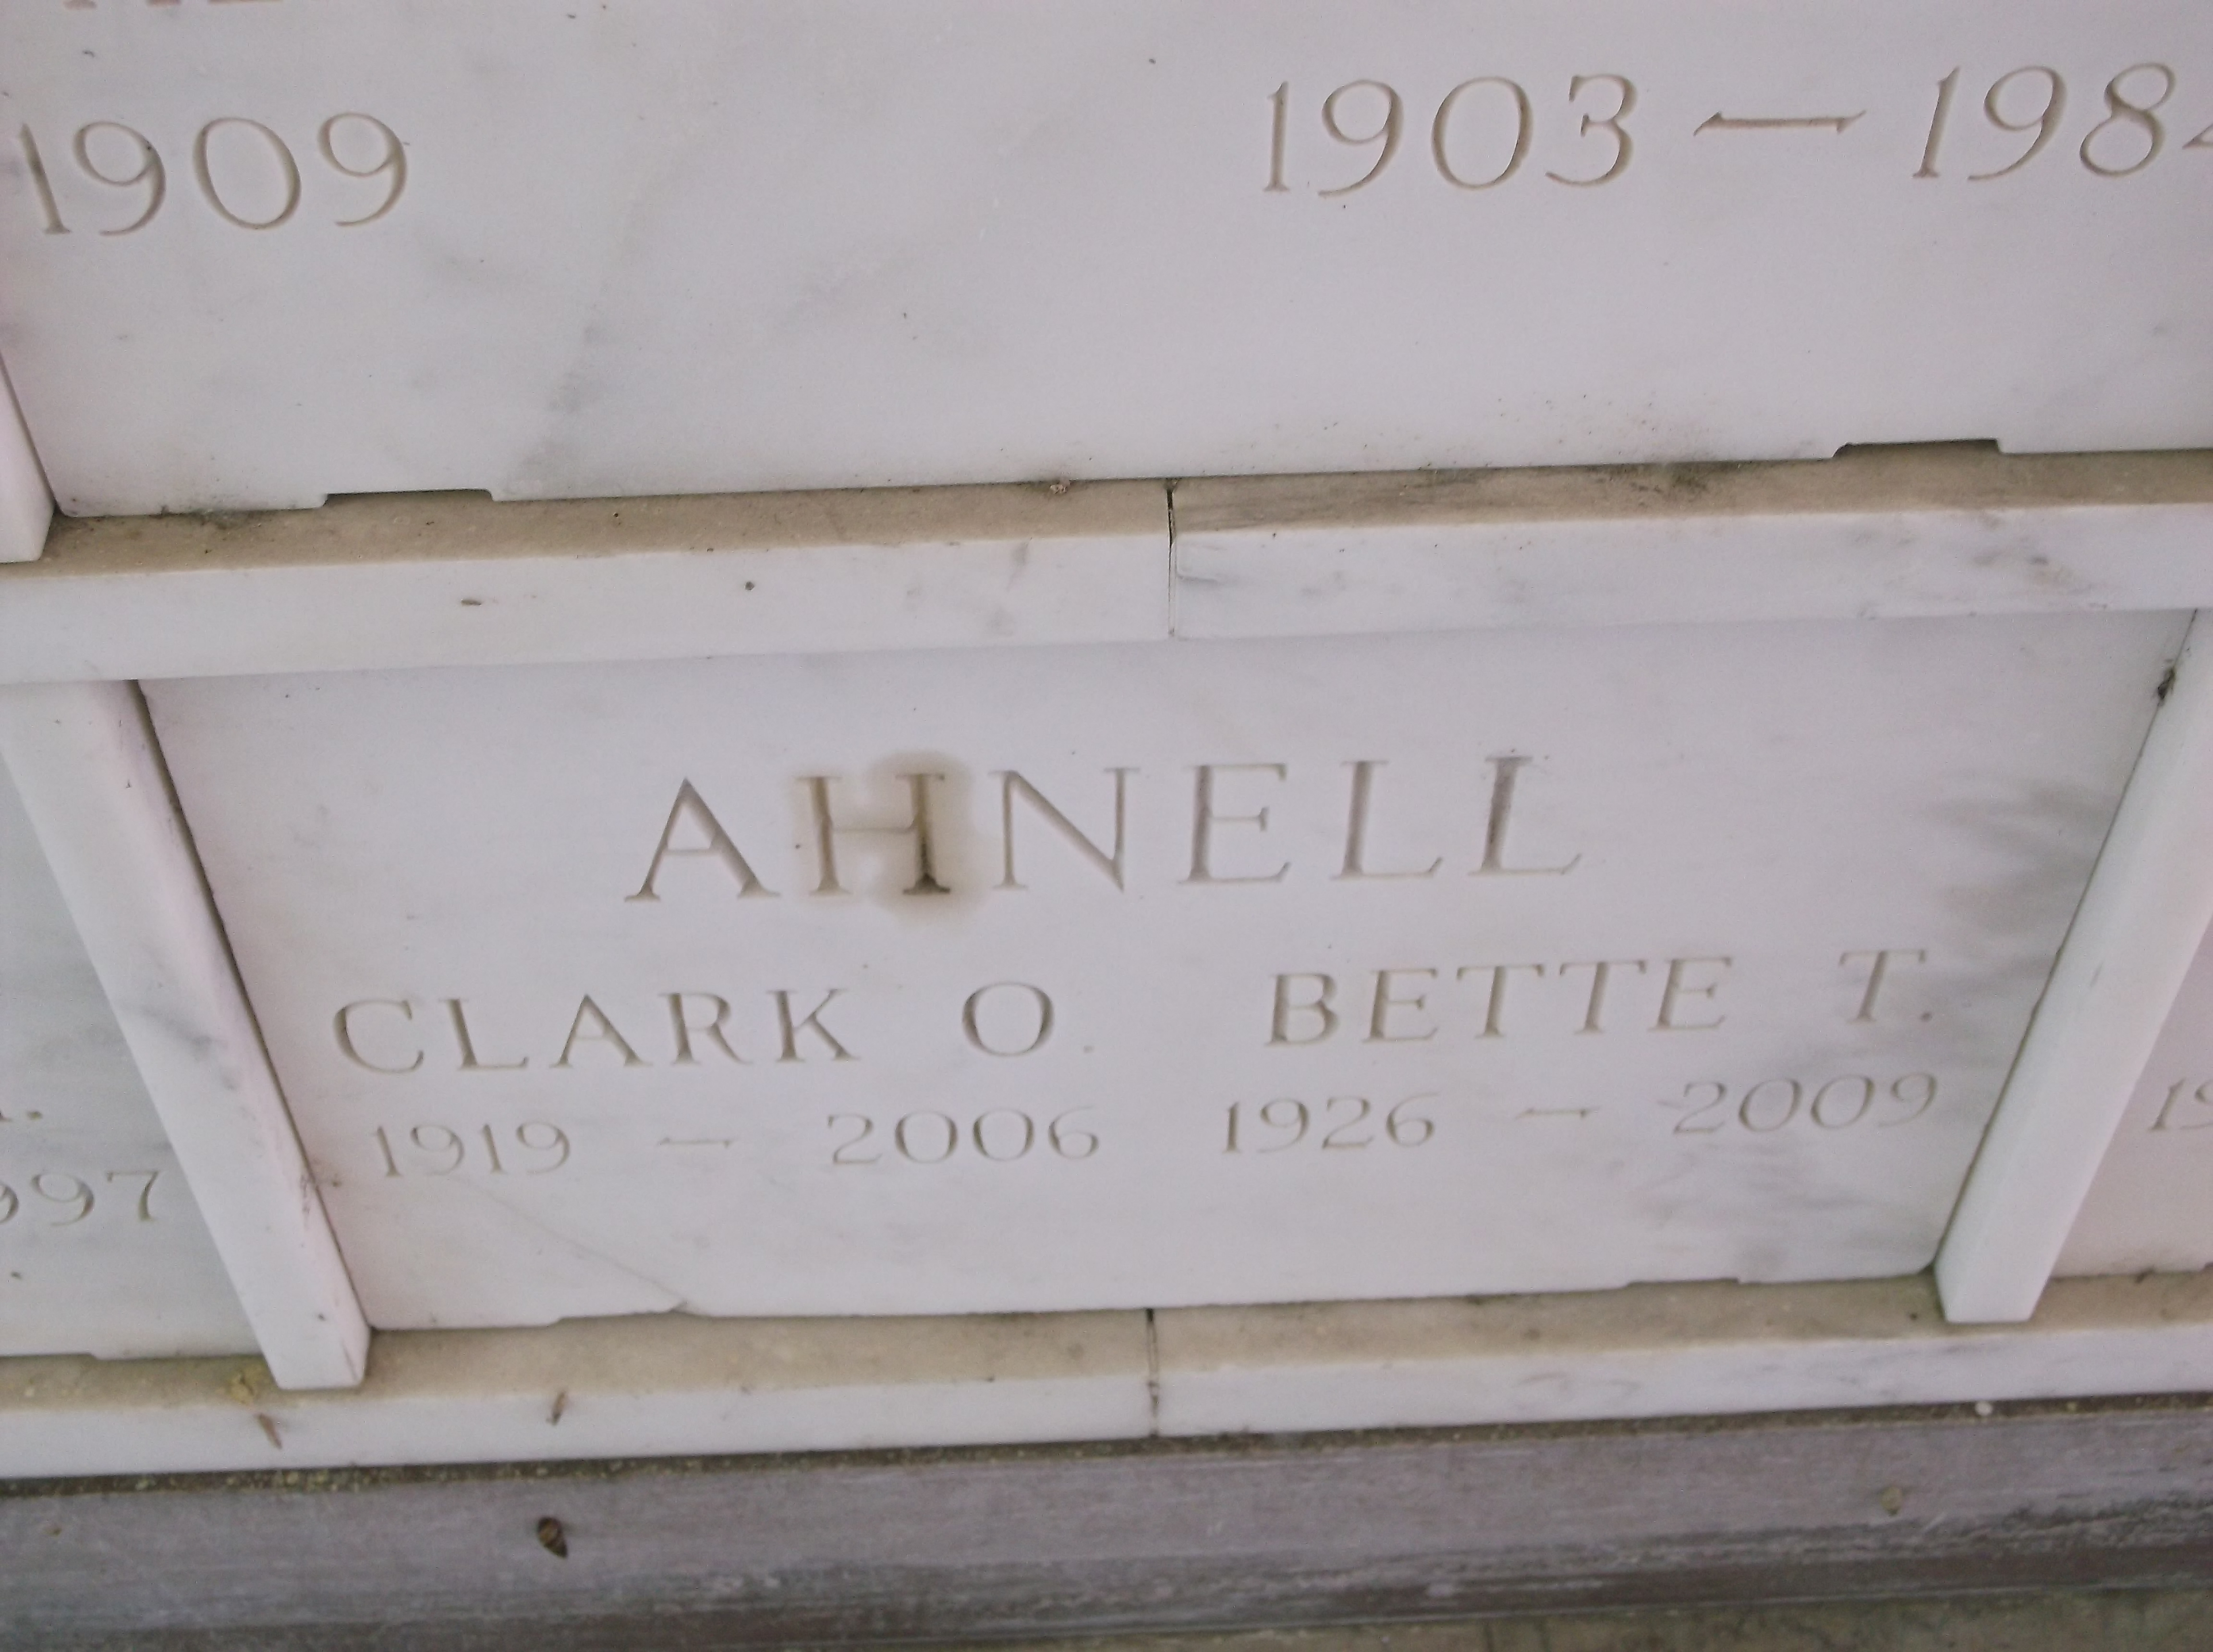 Bette T Ahnell